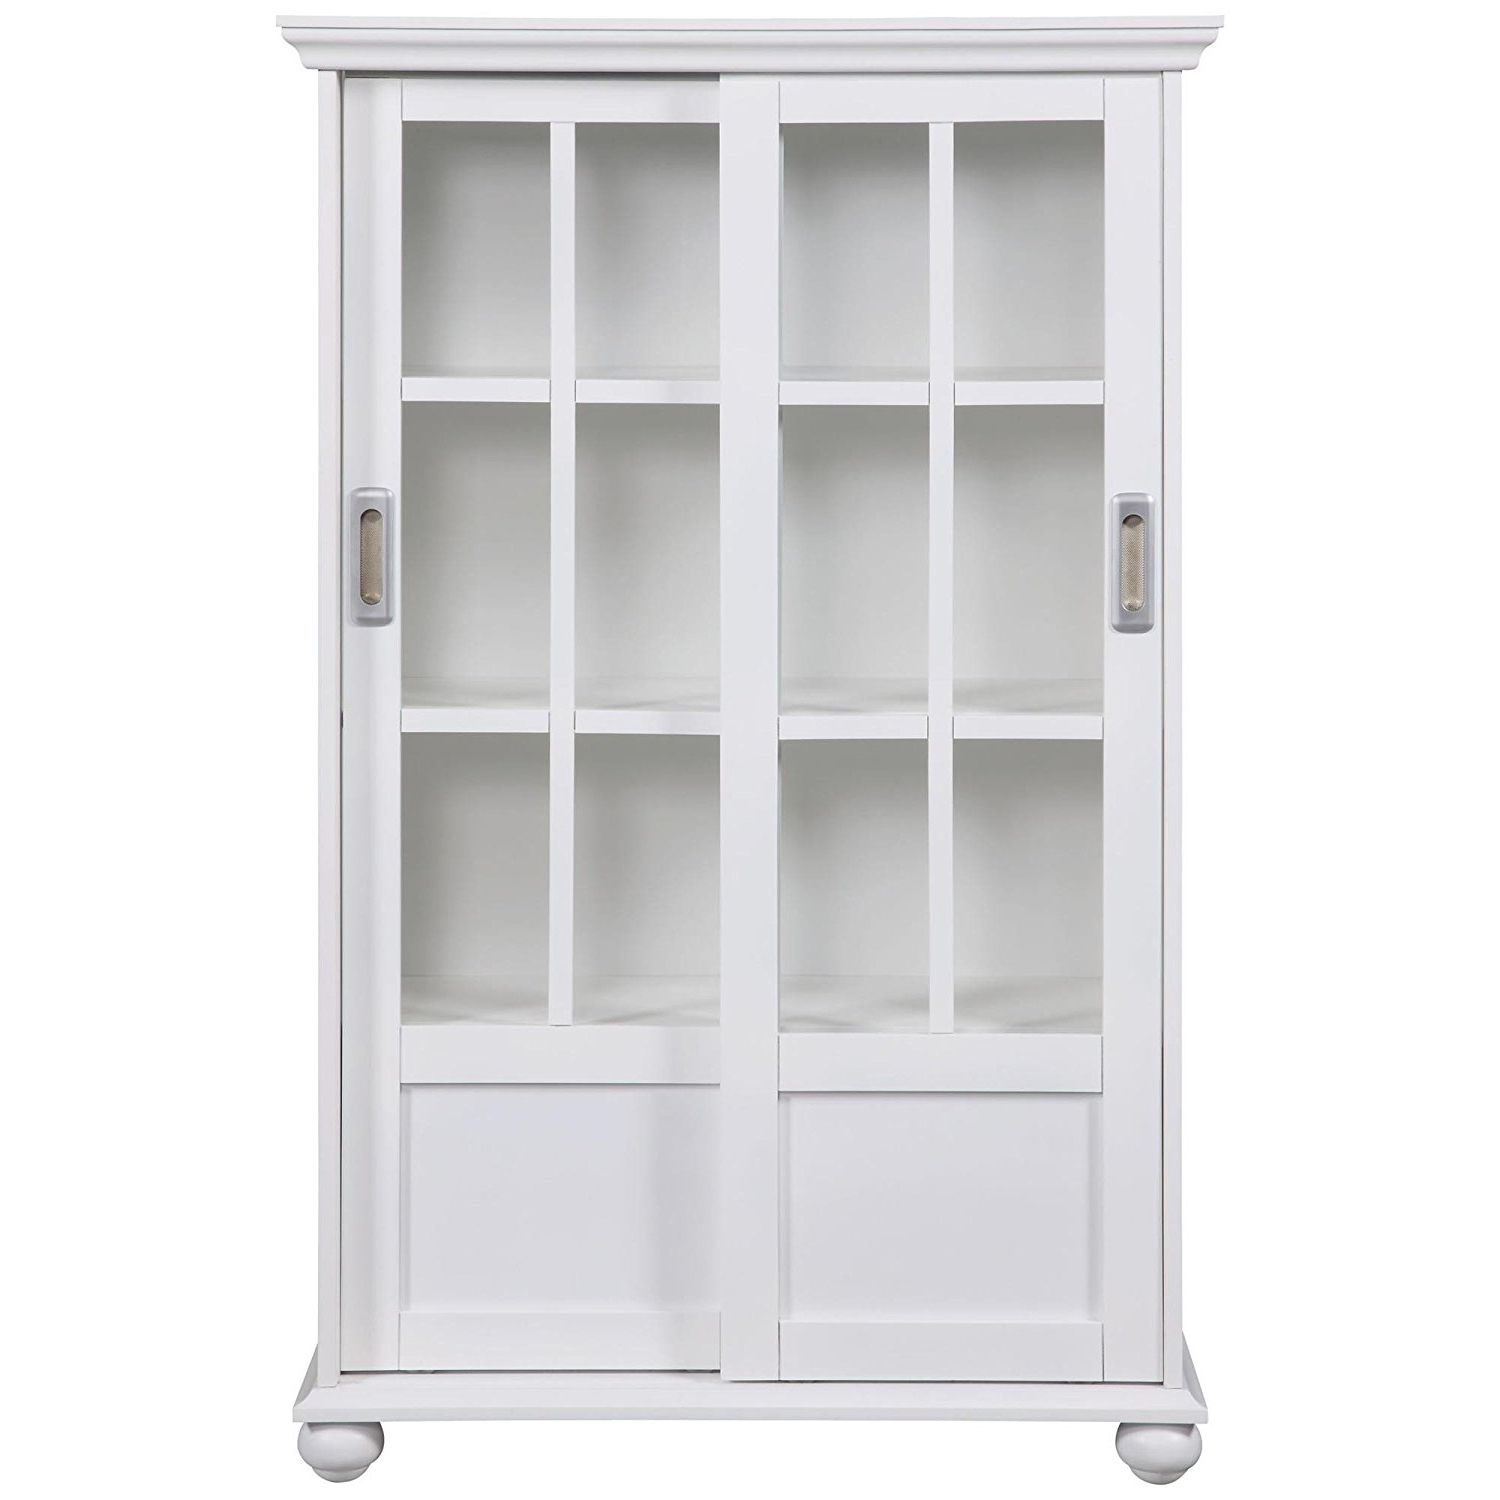 Amazon: Altra 9448096 Bookcase With Sliding Glass Doors, White Intended For Best And Newest Bookcases With Doors (View 7 of 15)